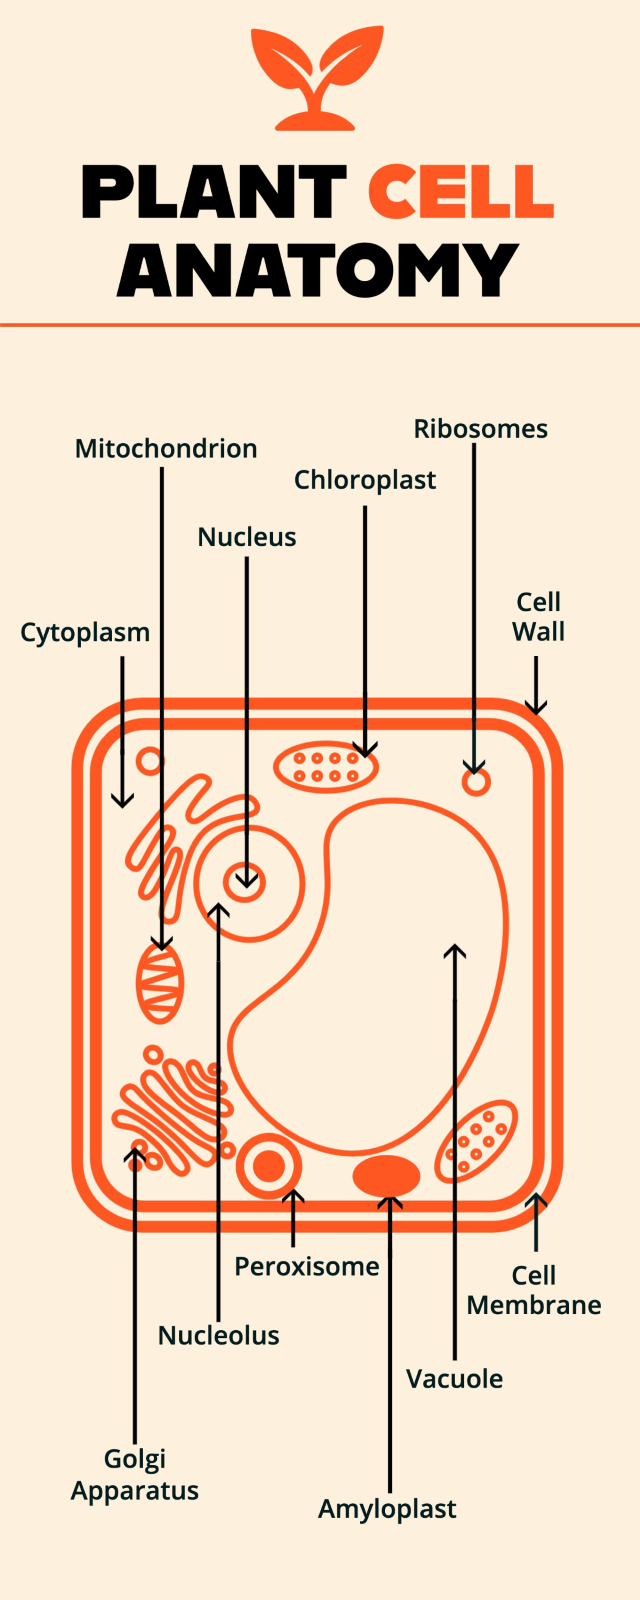 An infographic demonstrating plant cell anatomy by using a graphic of a plant cell and arrows pointing out the various parts